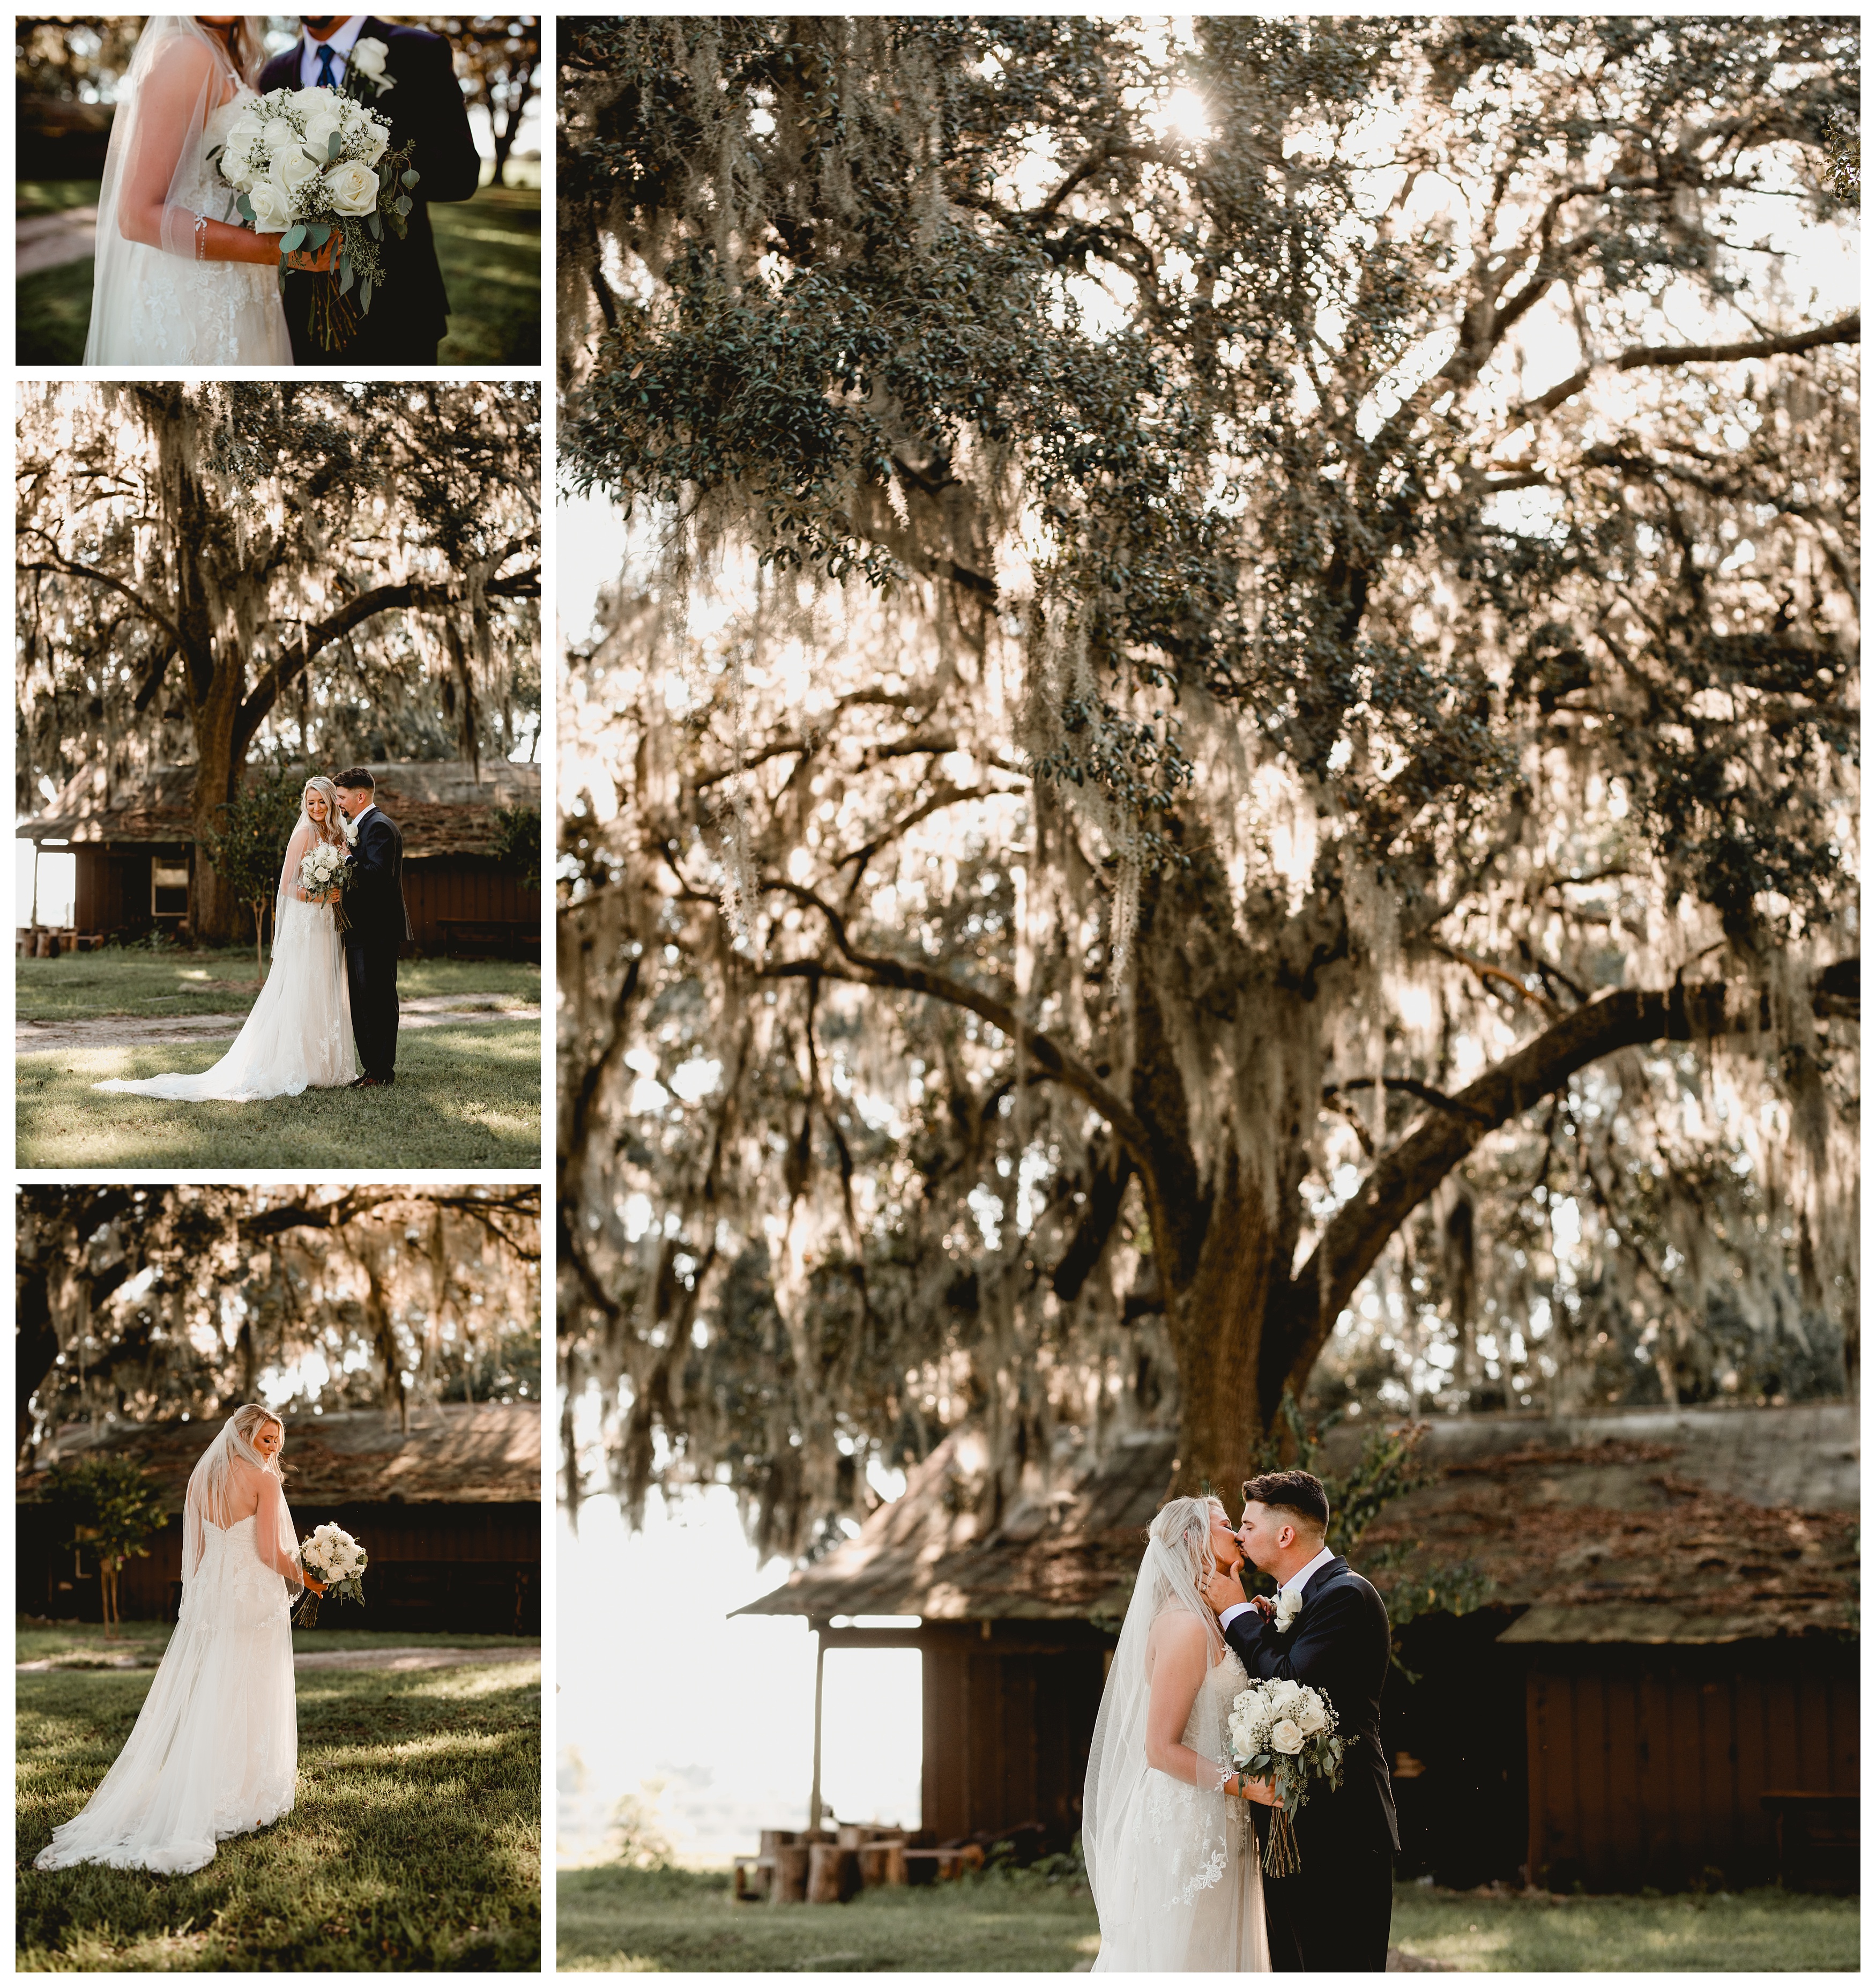 Wedding portrait photography by Tallahassee wedding photographer Shelly Williams